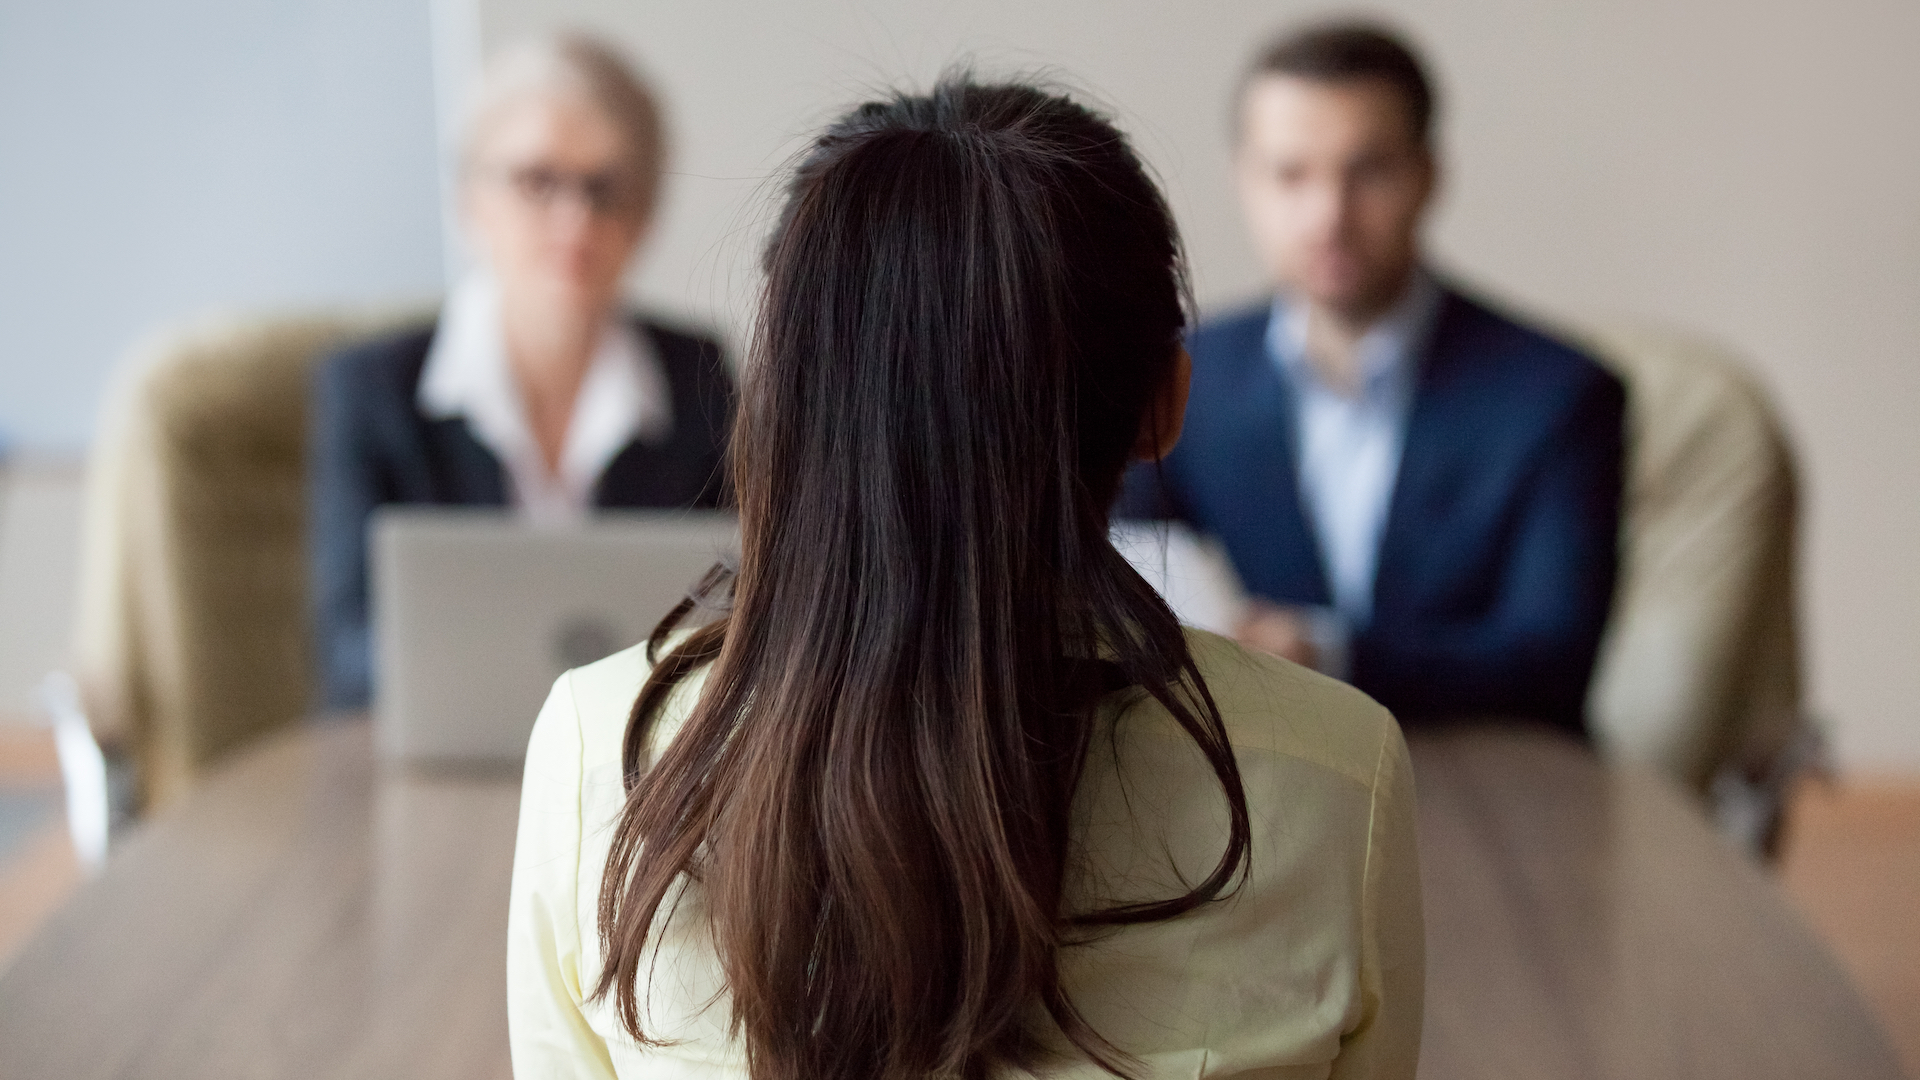 Businesswoman and businessman HR manager interviewing woman. Candidate female sitting her back to camera, focus on her, close up rear view, interviewers on background